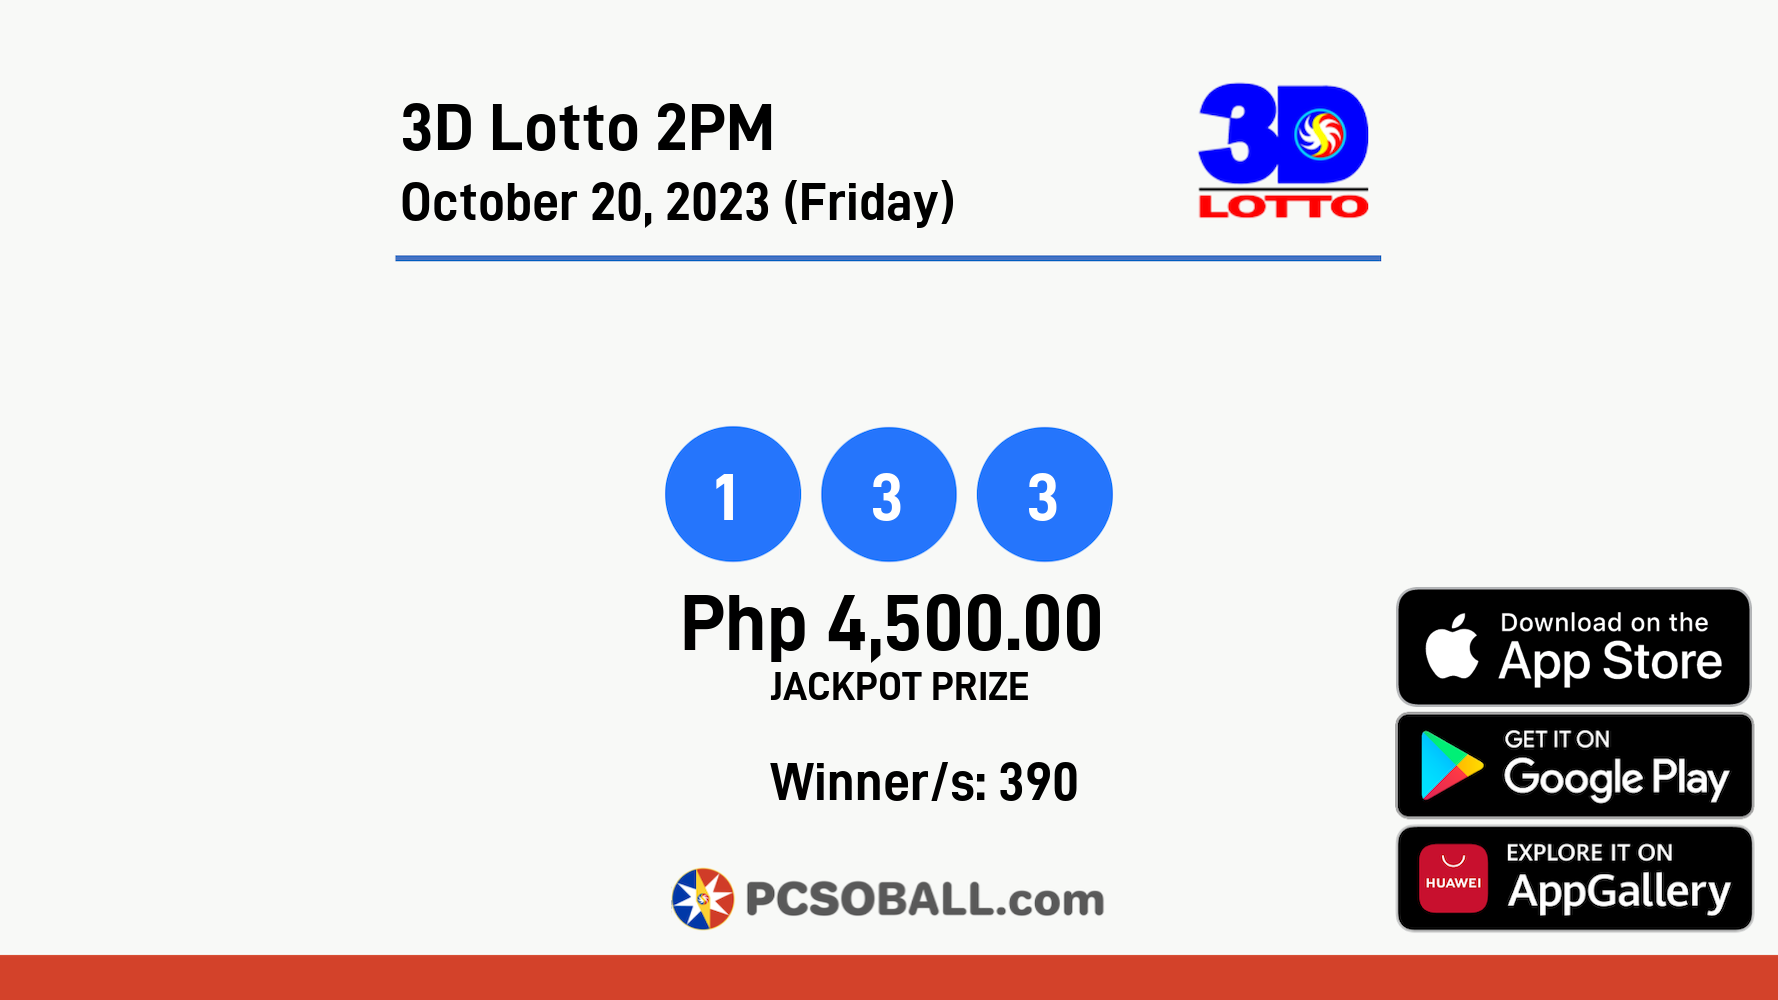 3D Lotto 2PM October 20, 2023 (Friday) Result